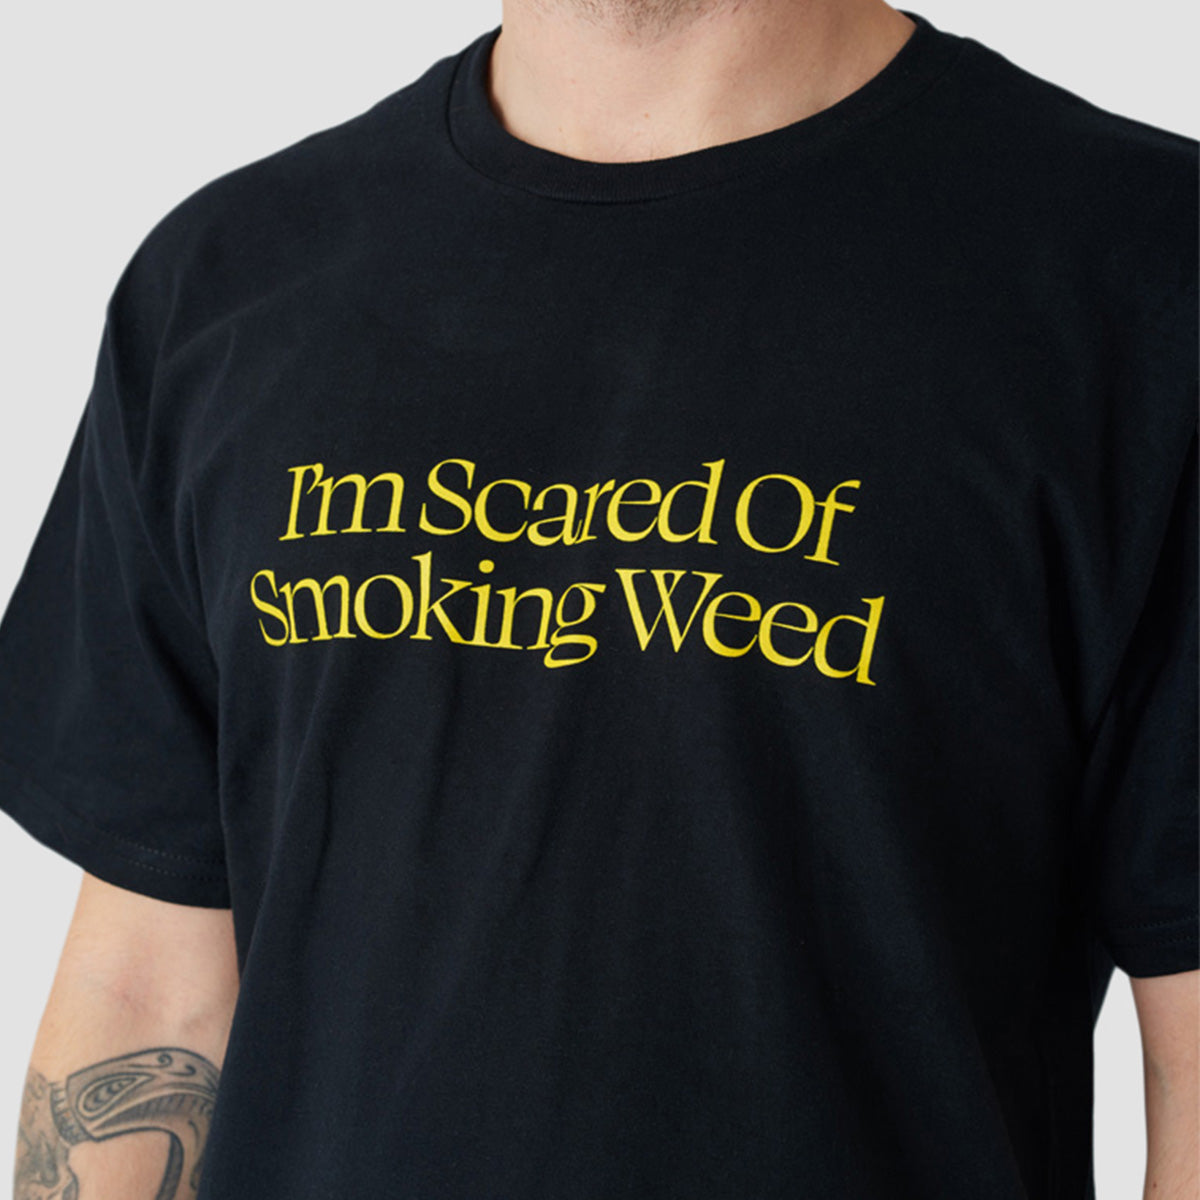 Jacuzzi Unlimited Scared Weed T-Shirt Black